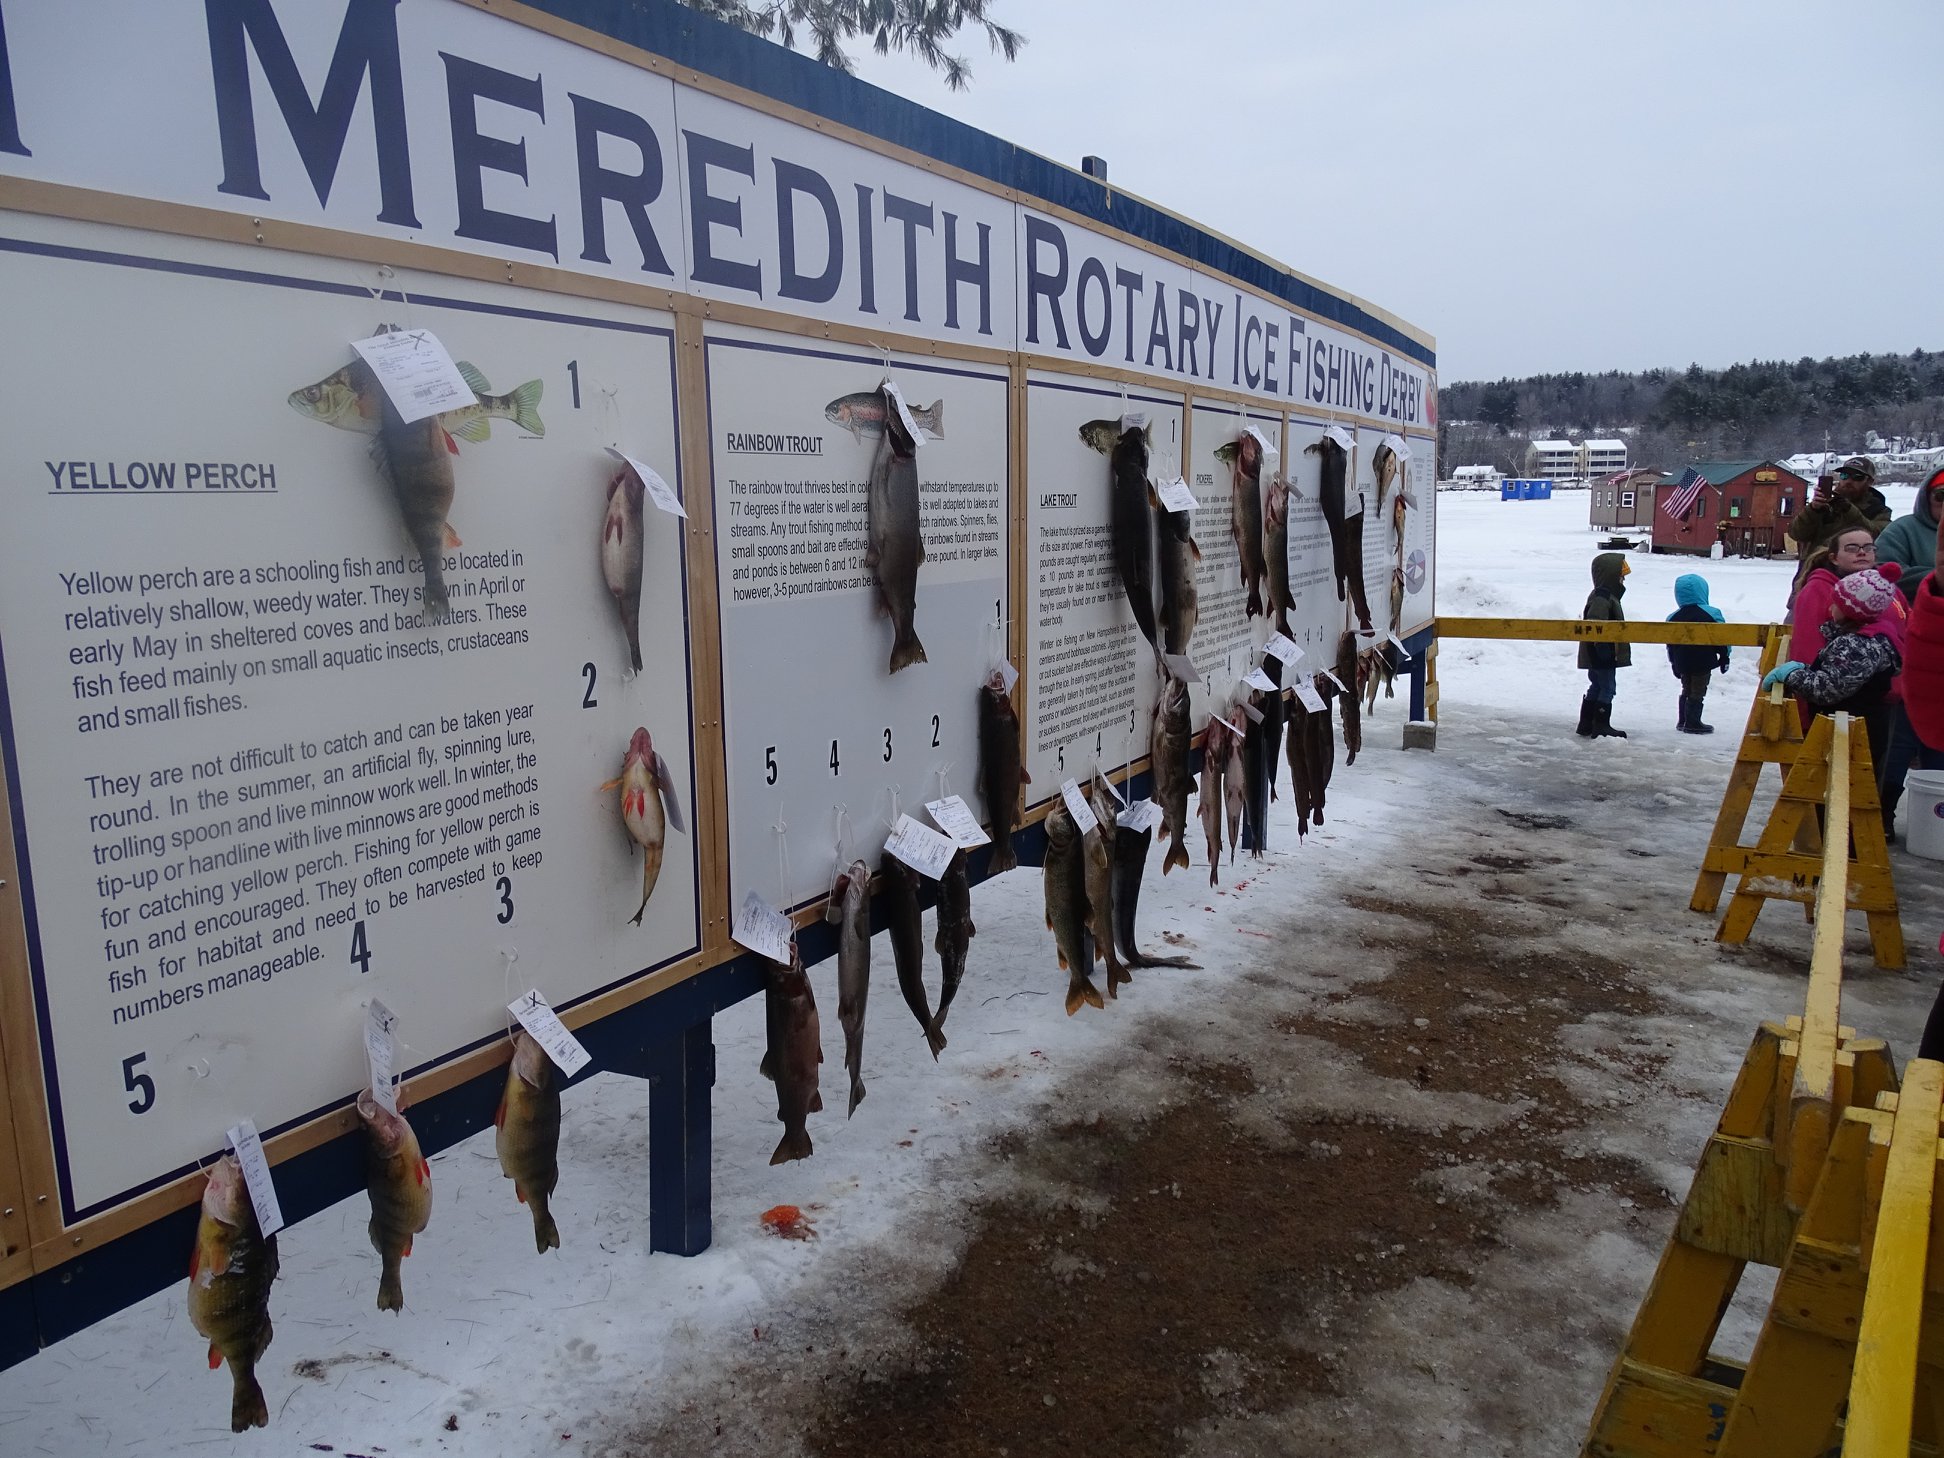 Join Us at the Great Meredith Rotary Ice Fishing Derby February 12-13